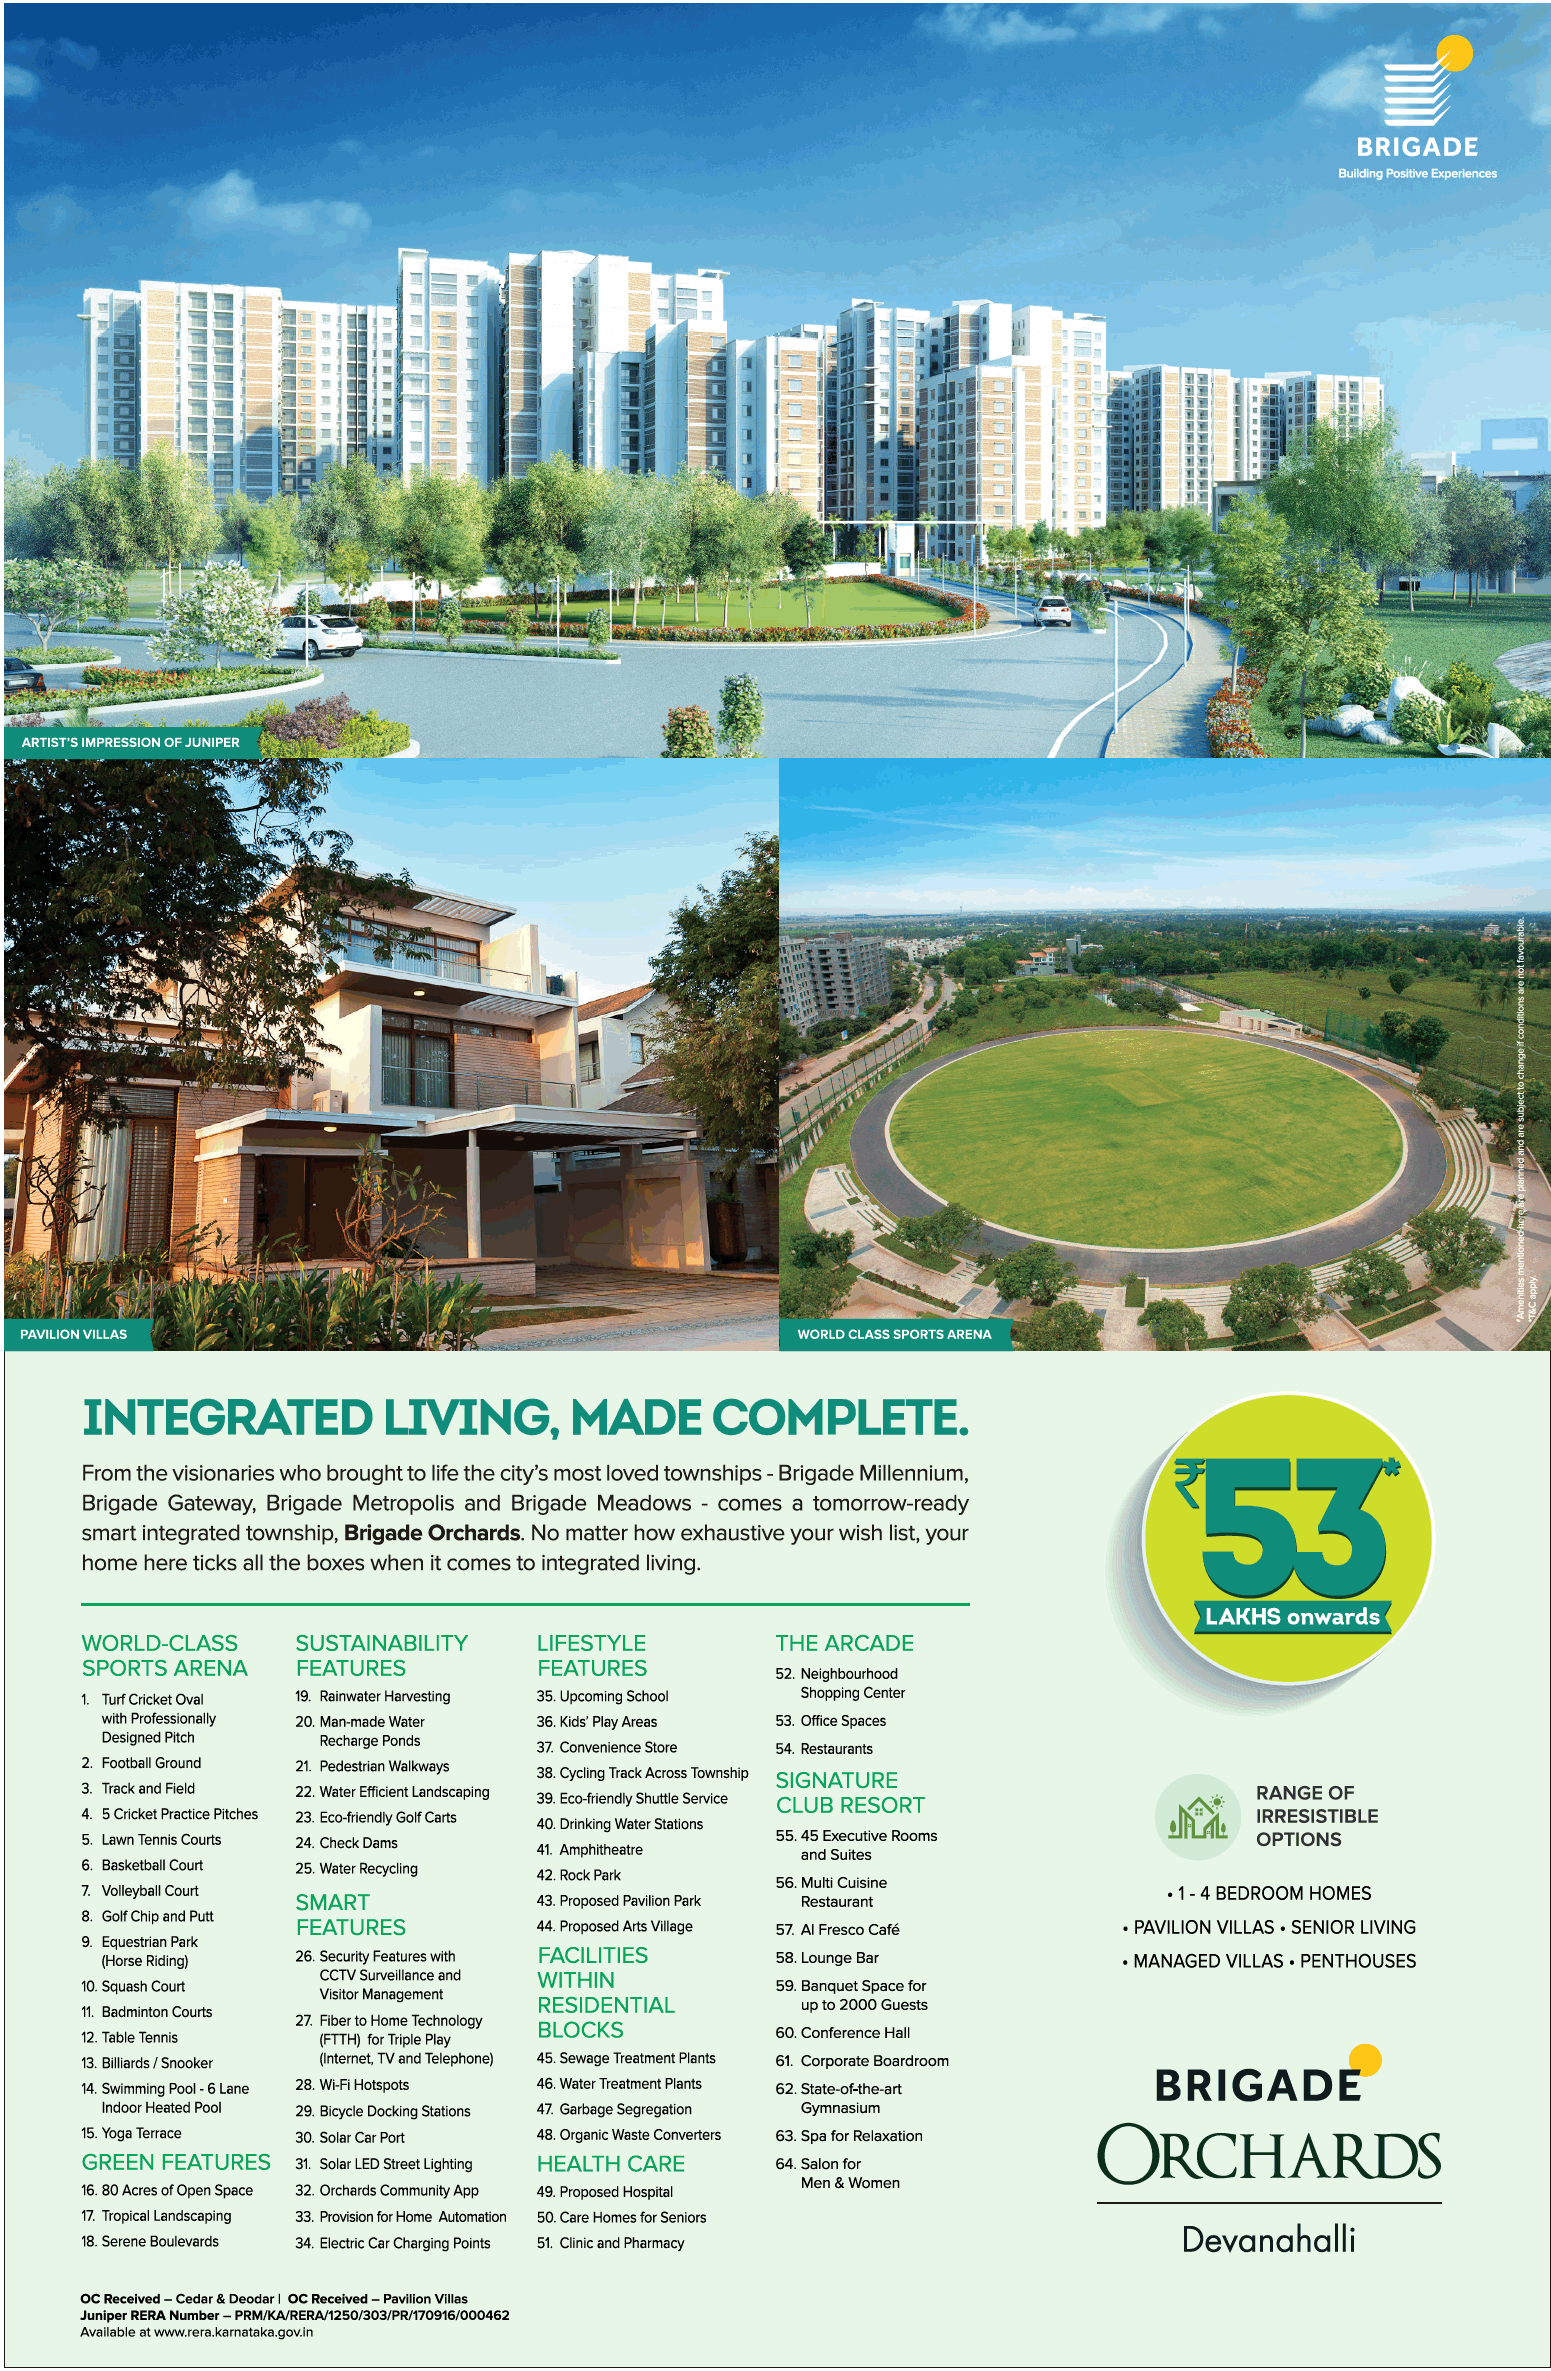 Book 1 to 4 bedroom homes at Rs. 53 lakhs at Brigade Orchards in Bangalore Update